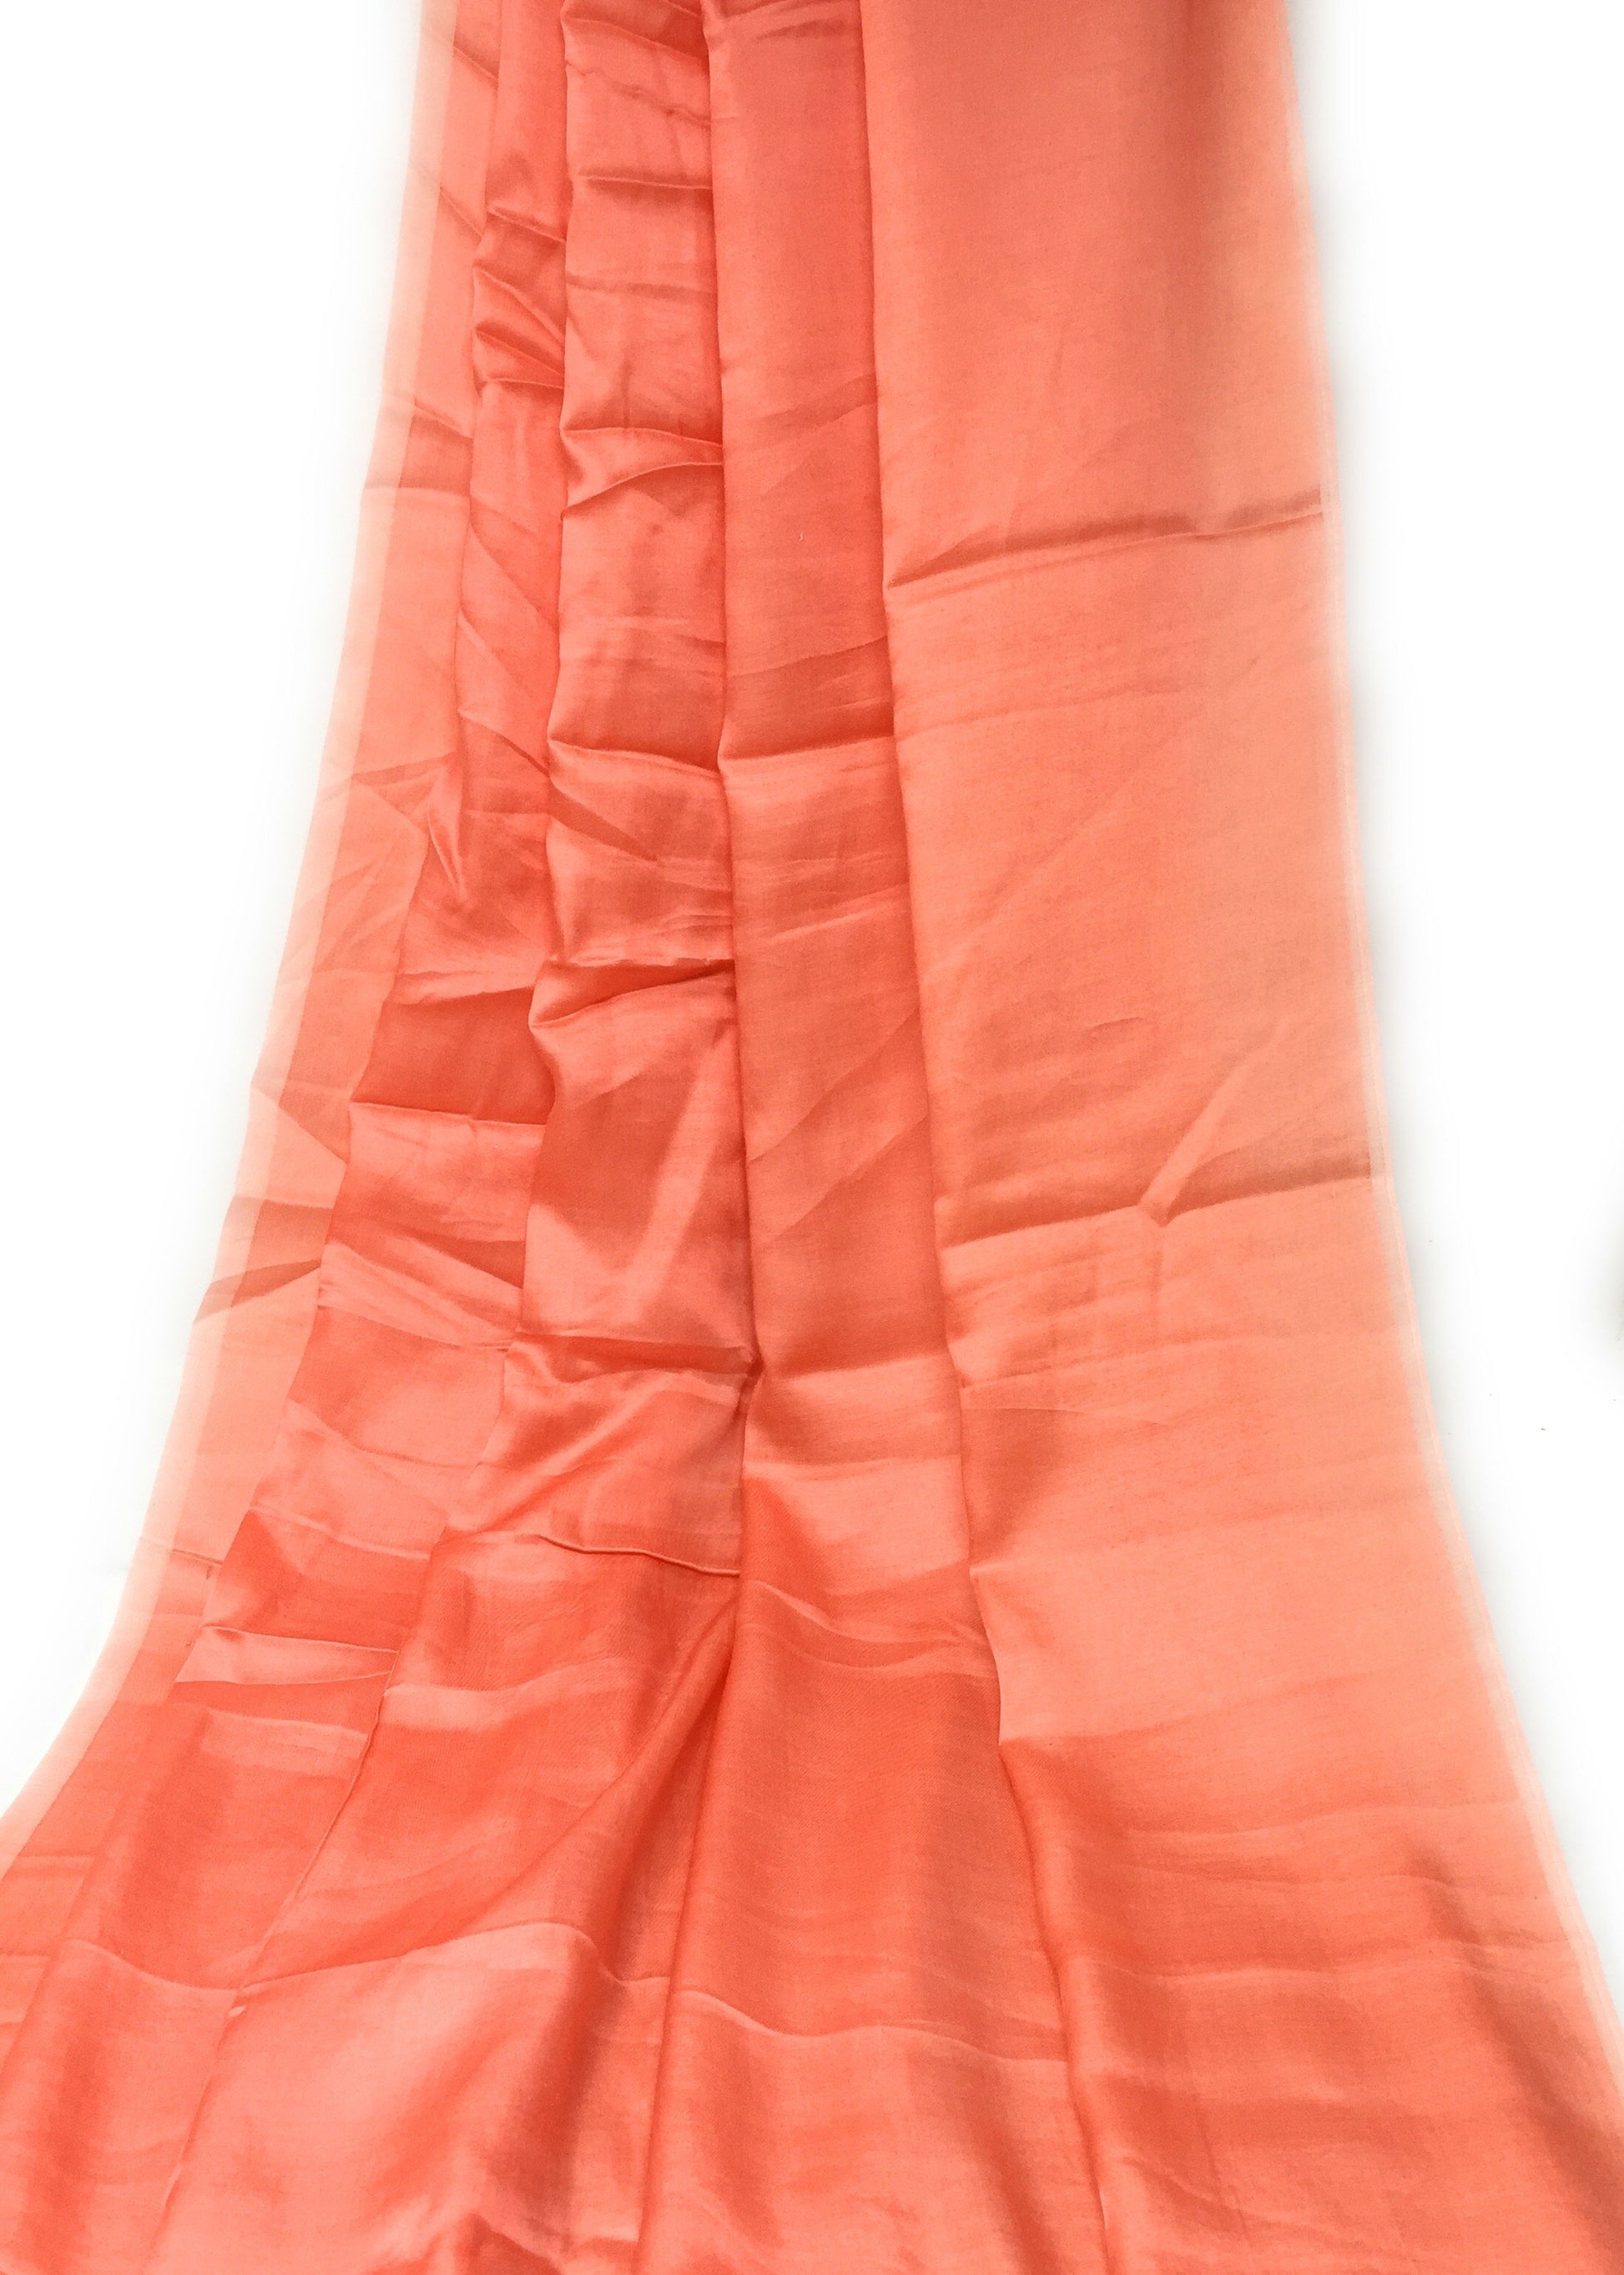 Pure Orange Silk Material - Solid Colour Fabric By The Yard - 1.5 Meter